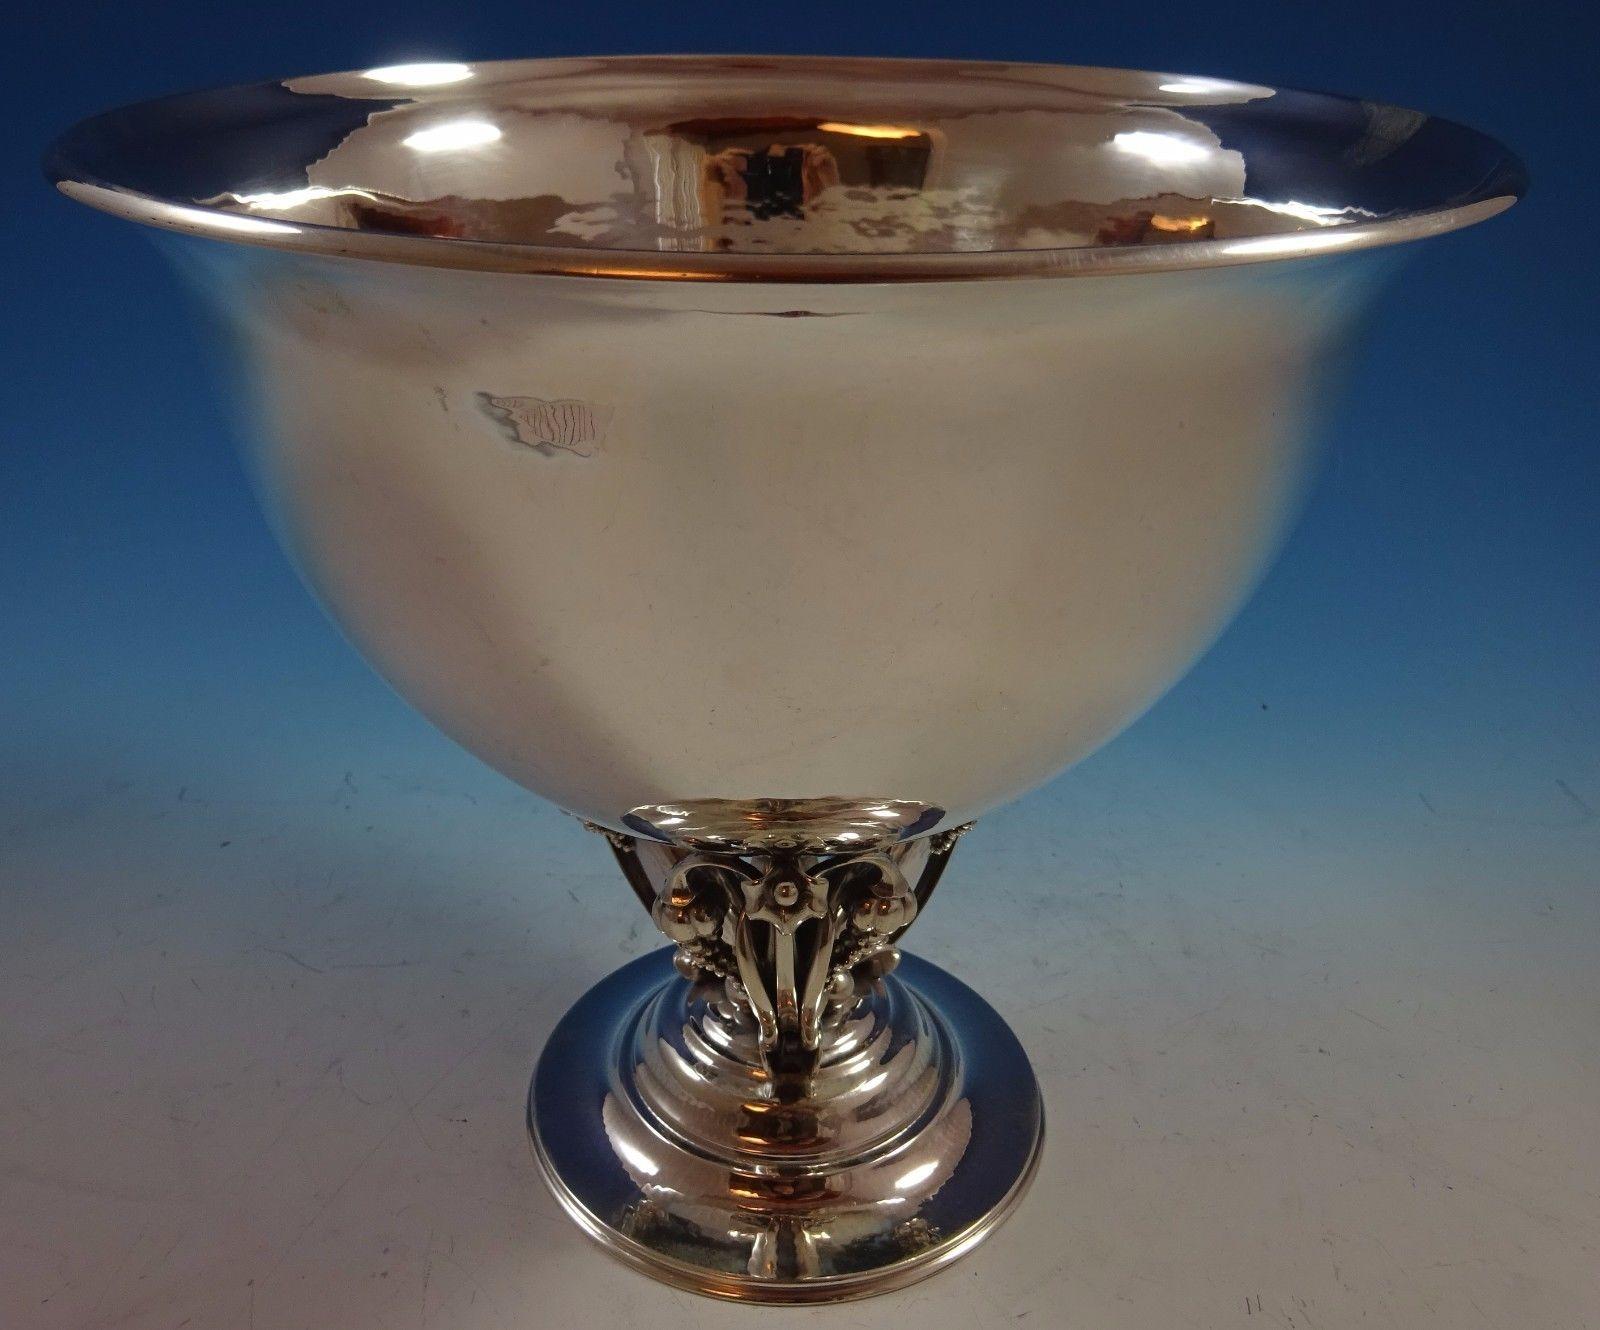 Gorgeous Georg Jensen sterling silver centerpiece bowl featuring a base made of 3-D blossoms with hanging fruit and beads. It has GI marks for 1910-30 and #468A. The piece measures 8 1/8